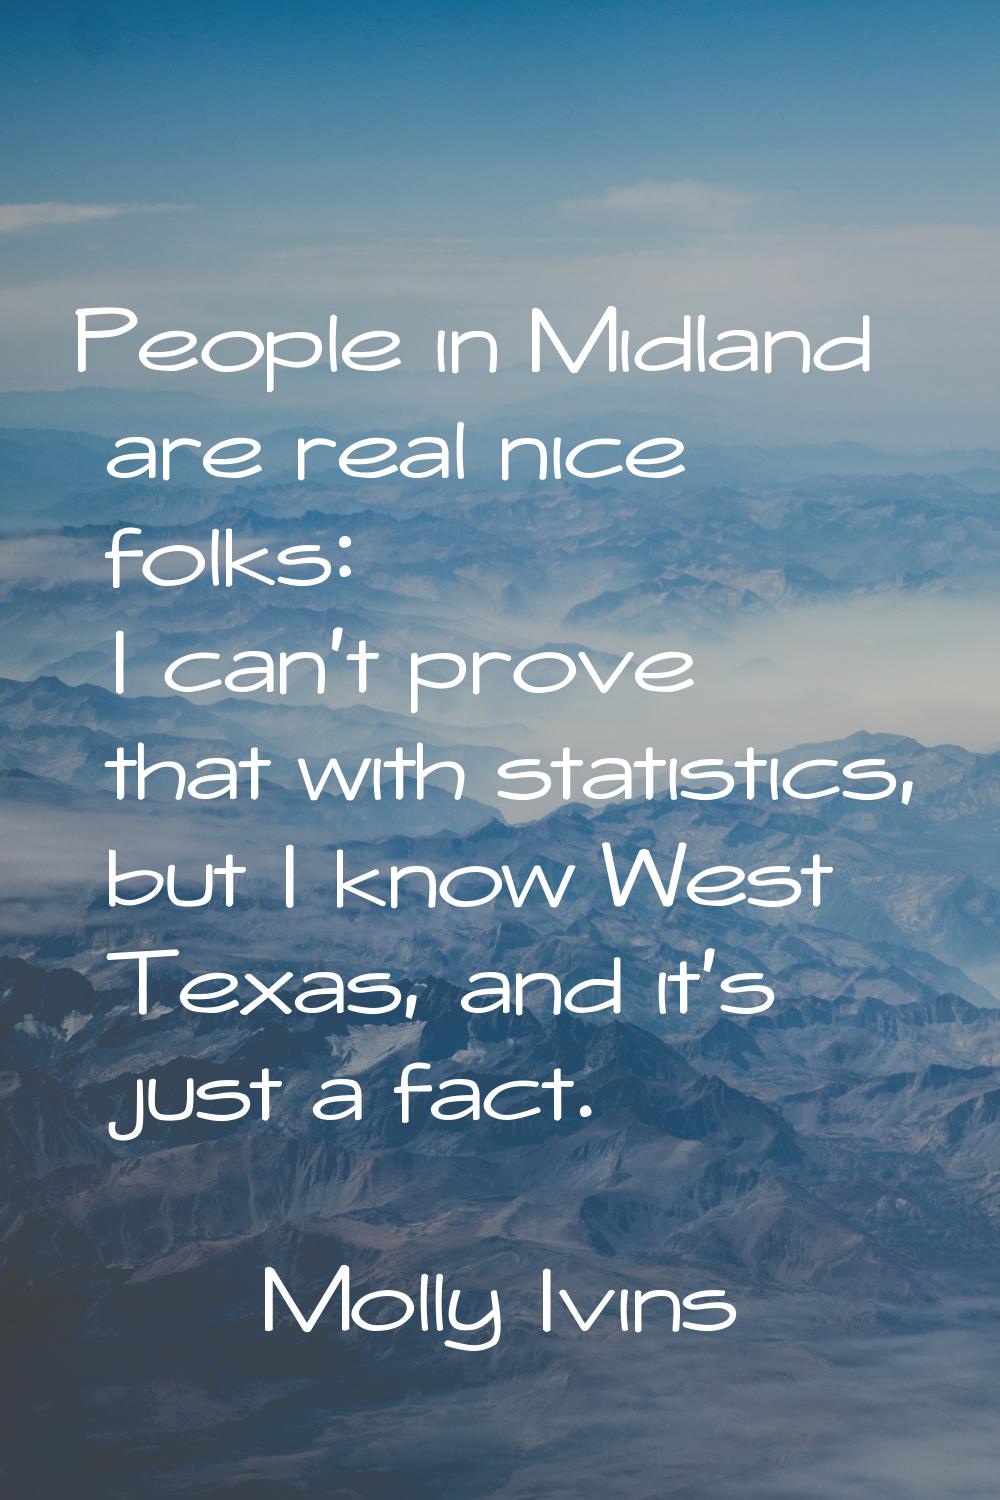 People in Midland are real nice folks: I can't prove that with statistics, but I know West Texas, a